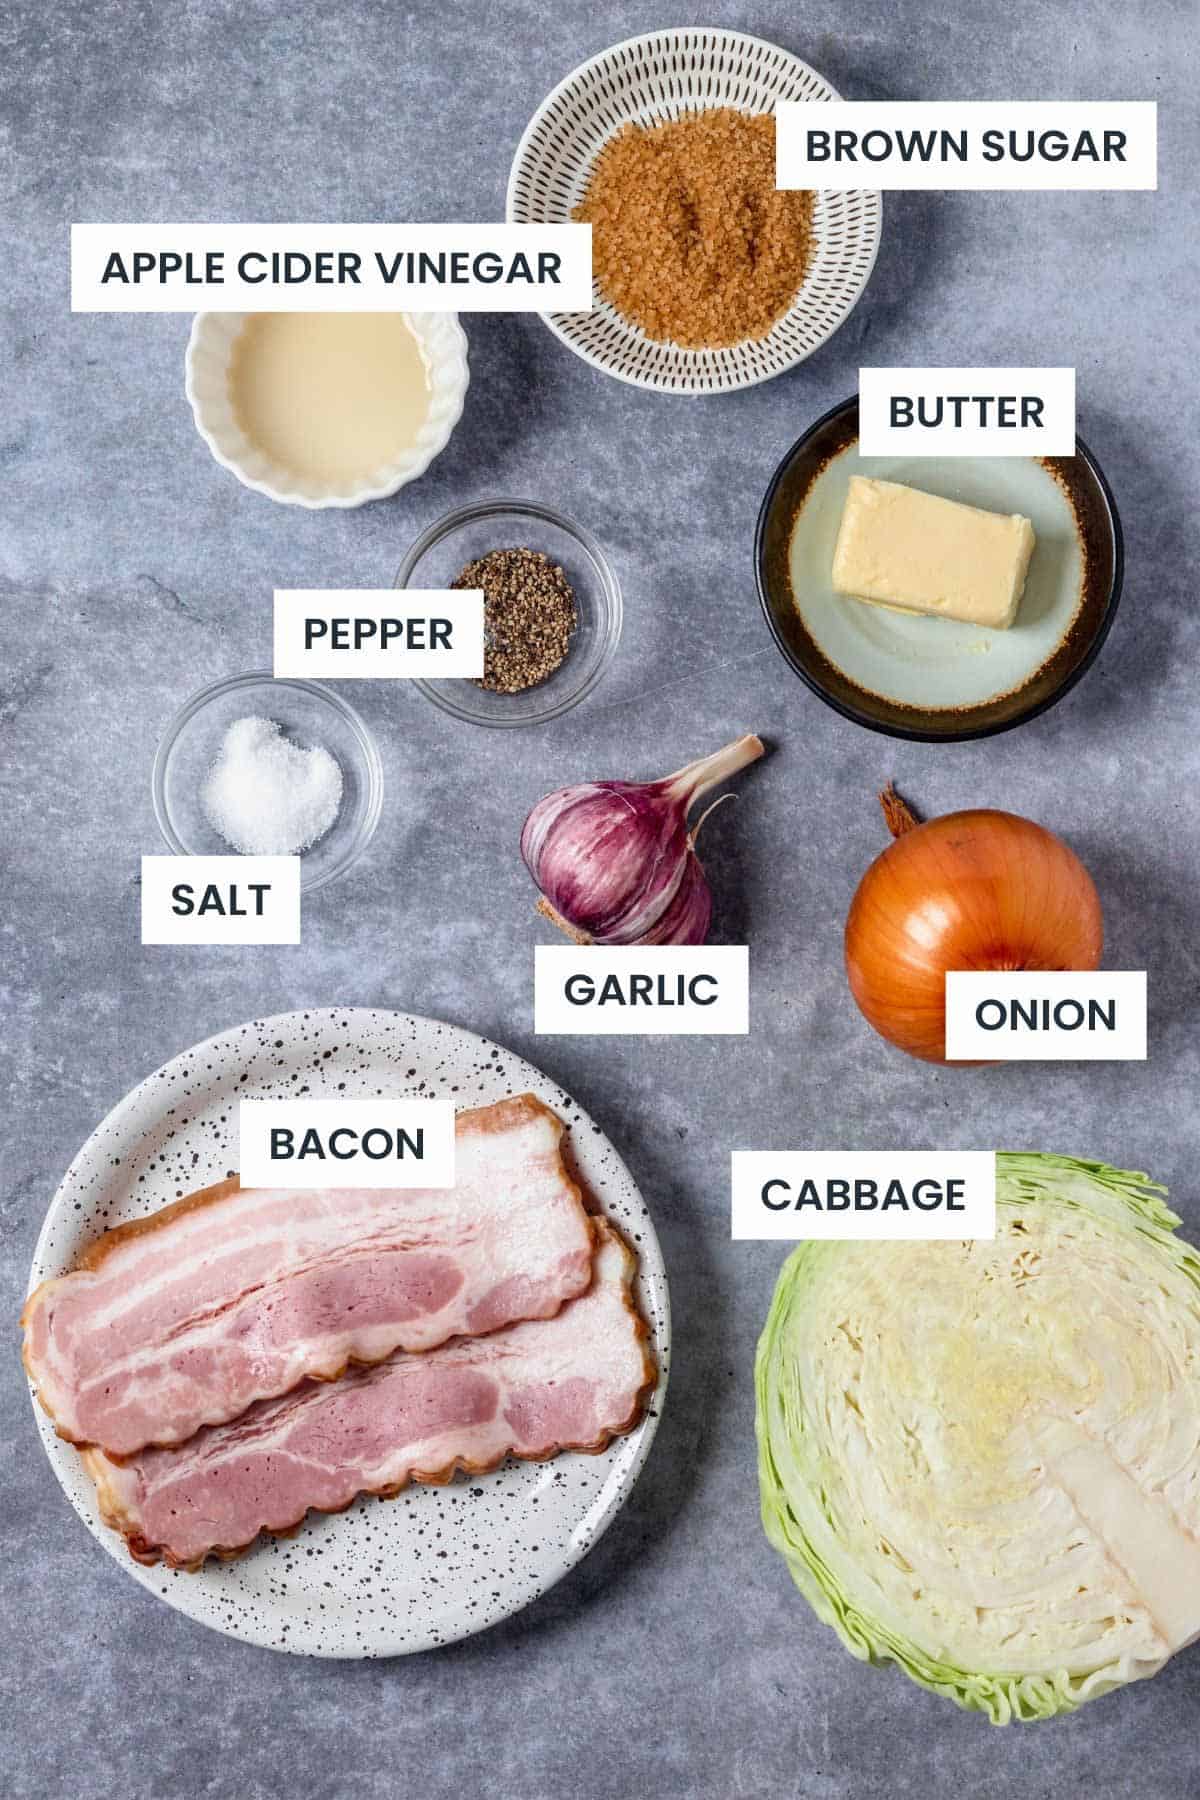 Fried Cabbage With Bacon Ingredients